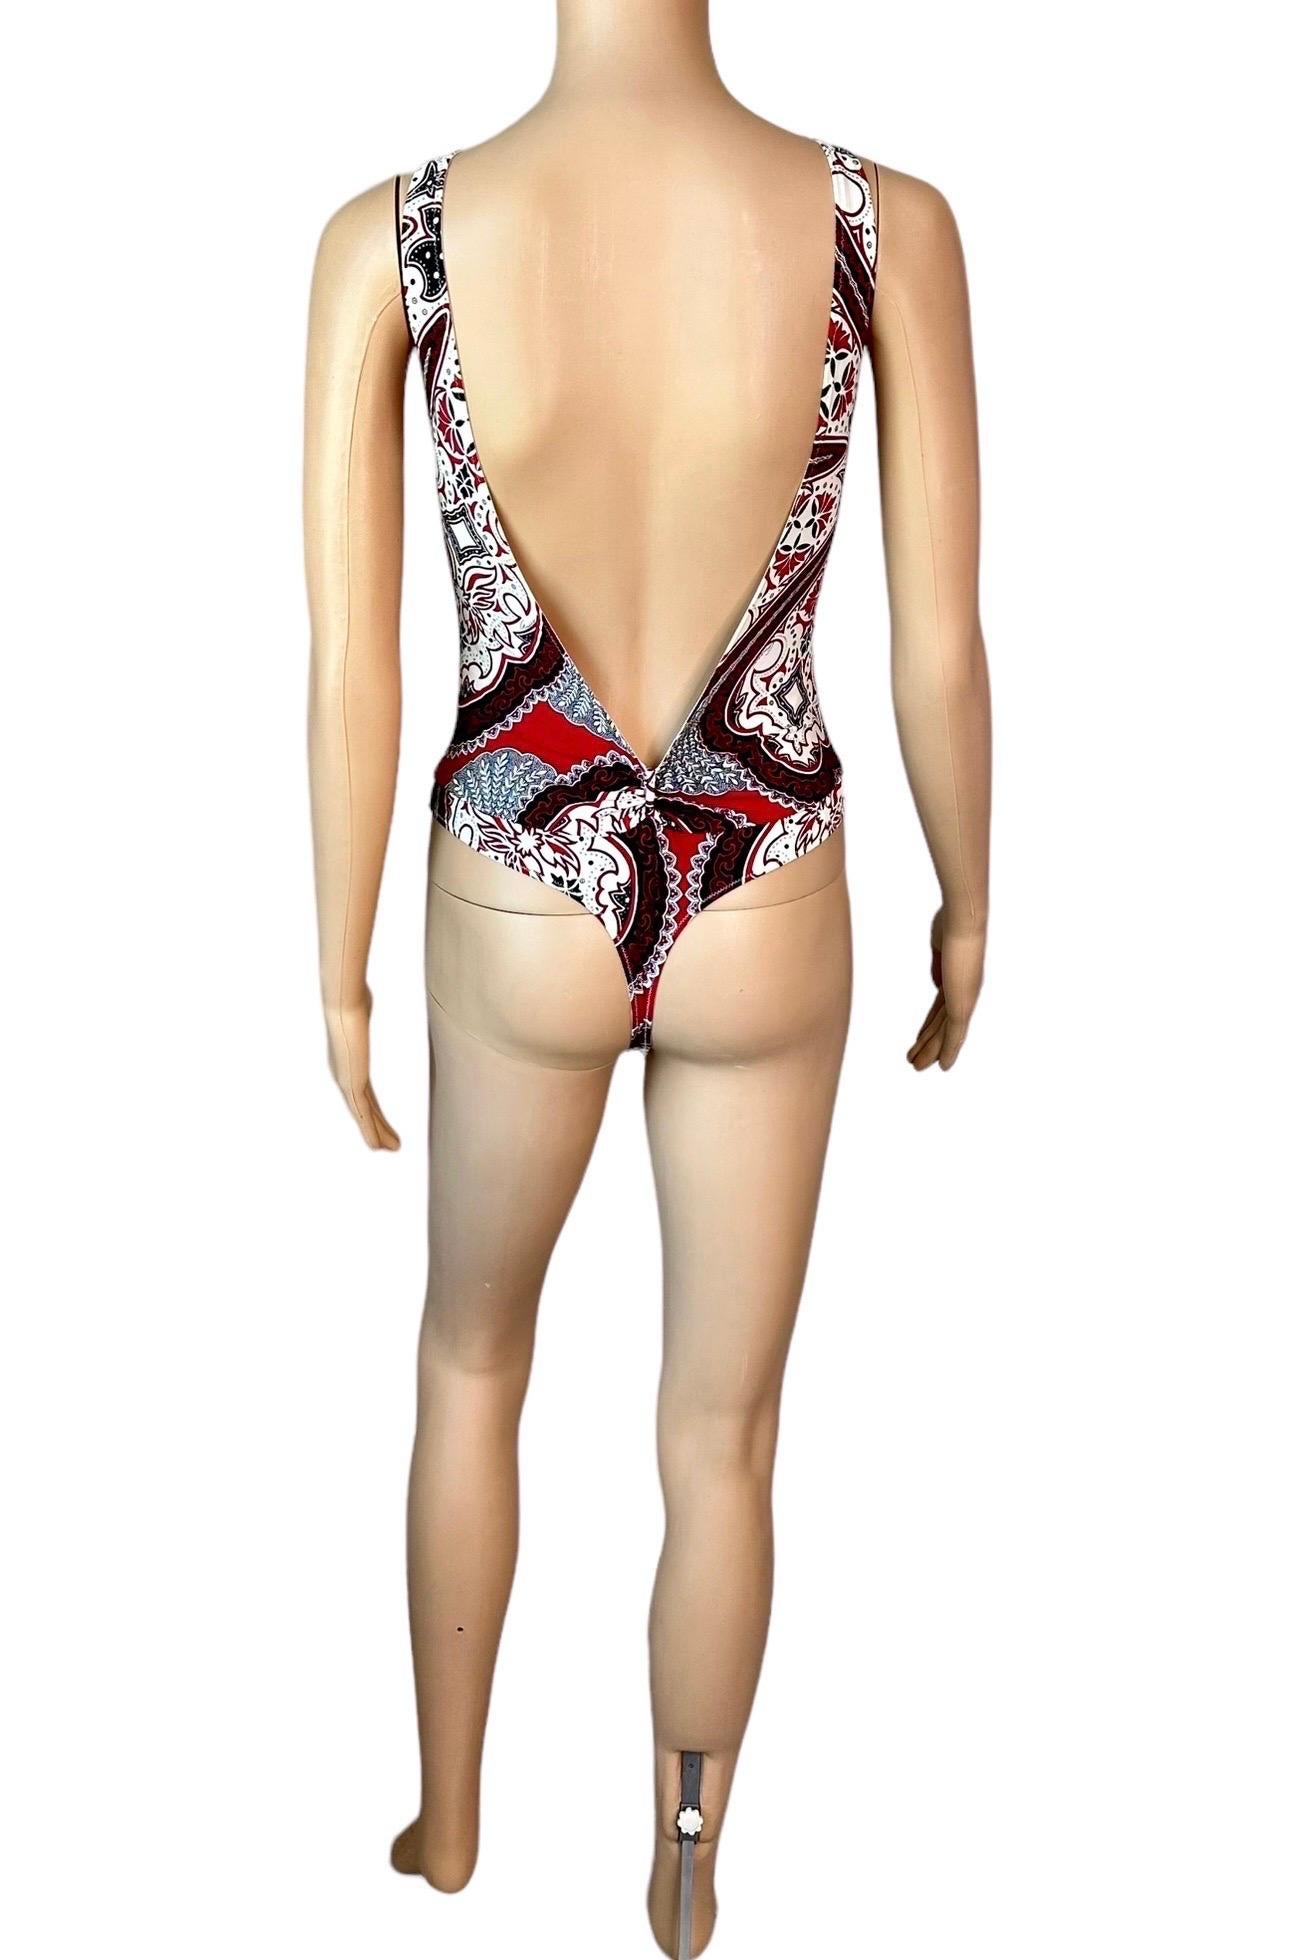 Tom Ford for Gucci Cruise 2004 Unworn One Piece Bodysuit Swimsuit Swimwear  For Sale 4